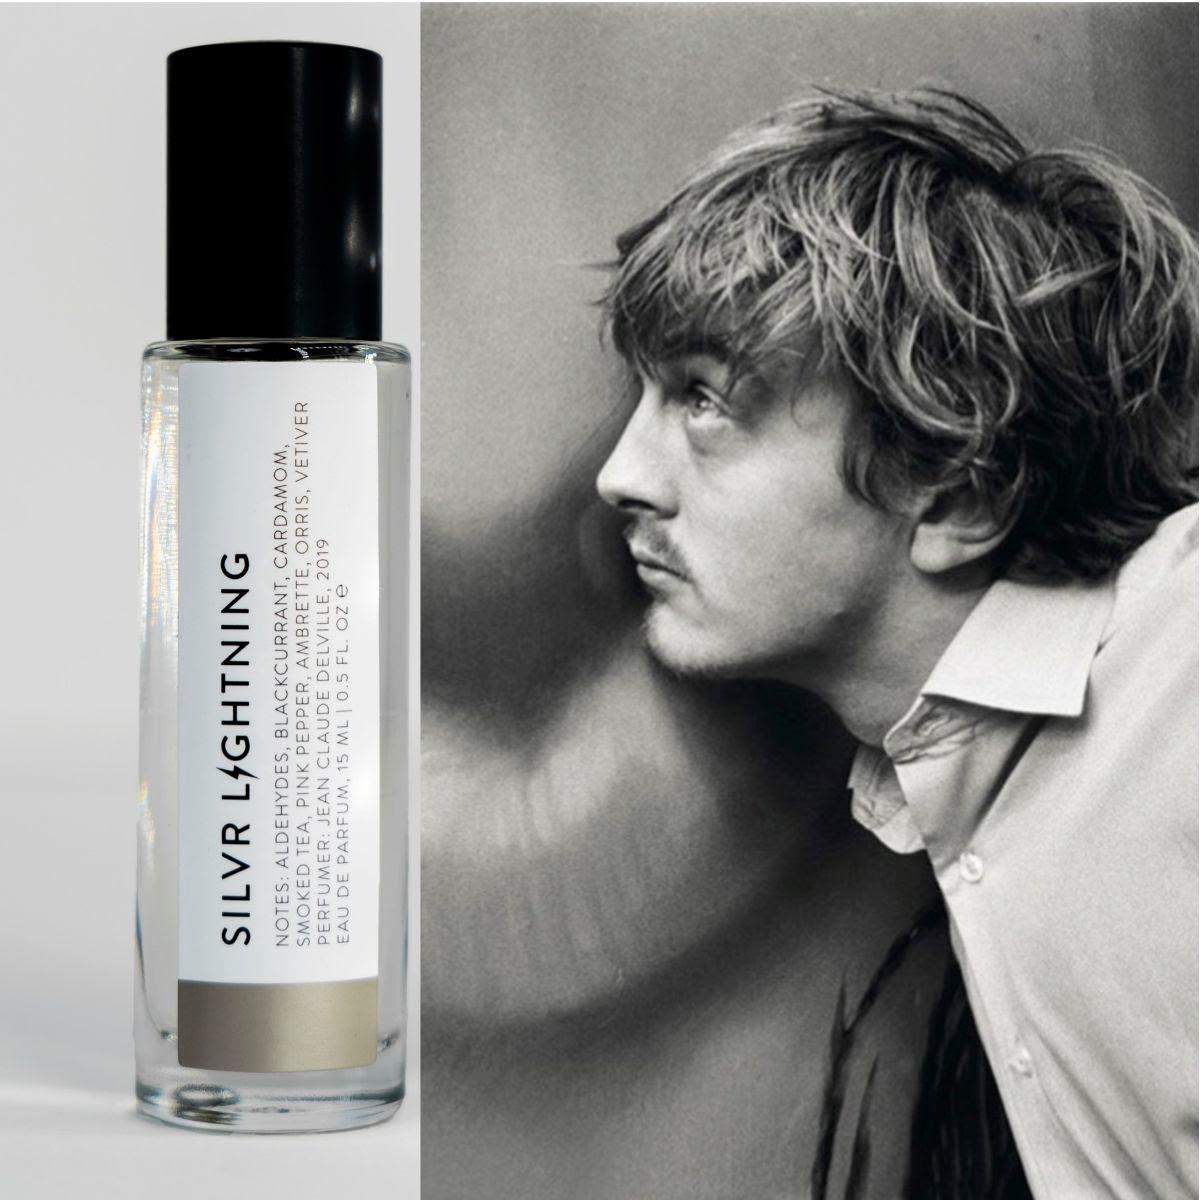 black and white photo of man looking upward by Denis Hopper, Silvr Lightning fragrance with grey label